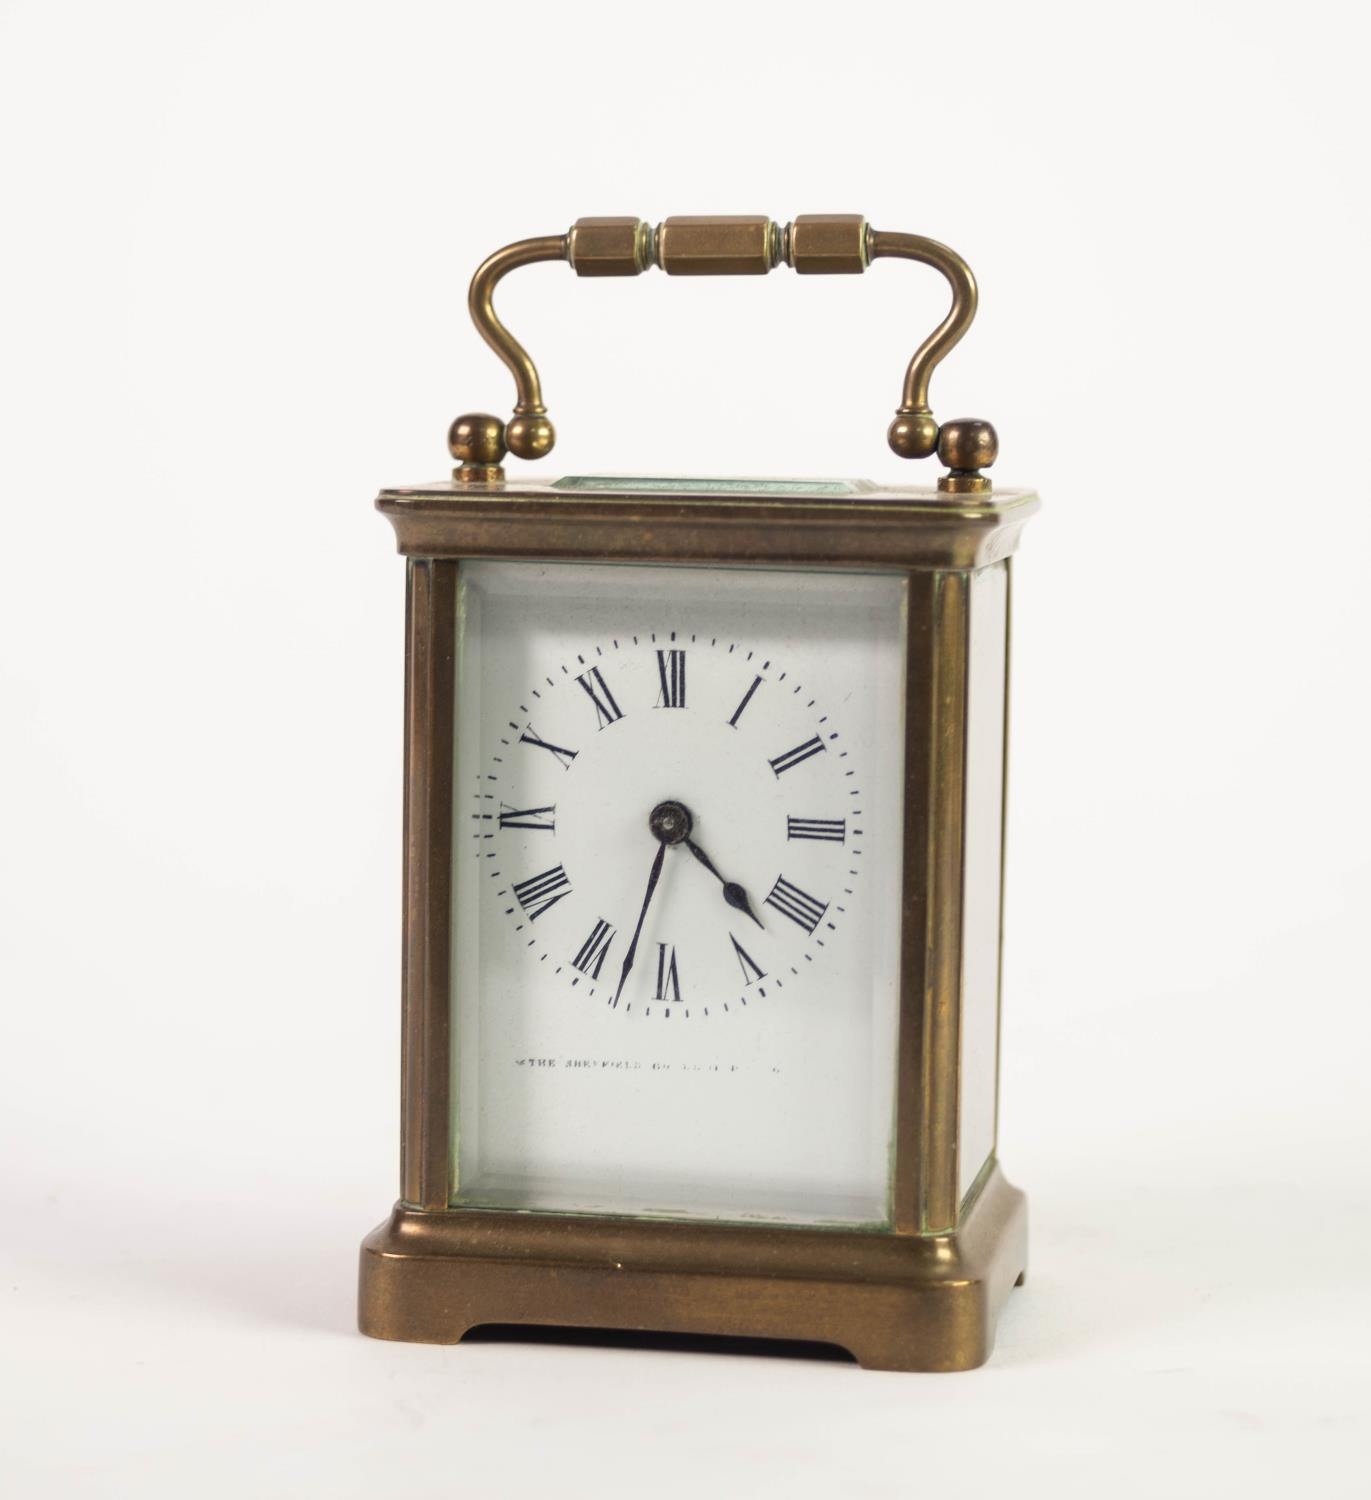 EARLY 20th CENTURY BRASS TIME PIECE CARRIAGE CLOCK with black and white roman dial, folding